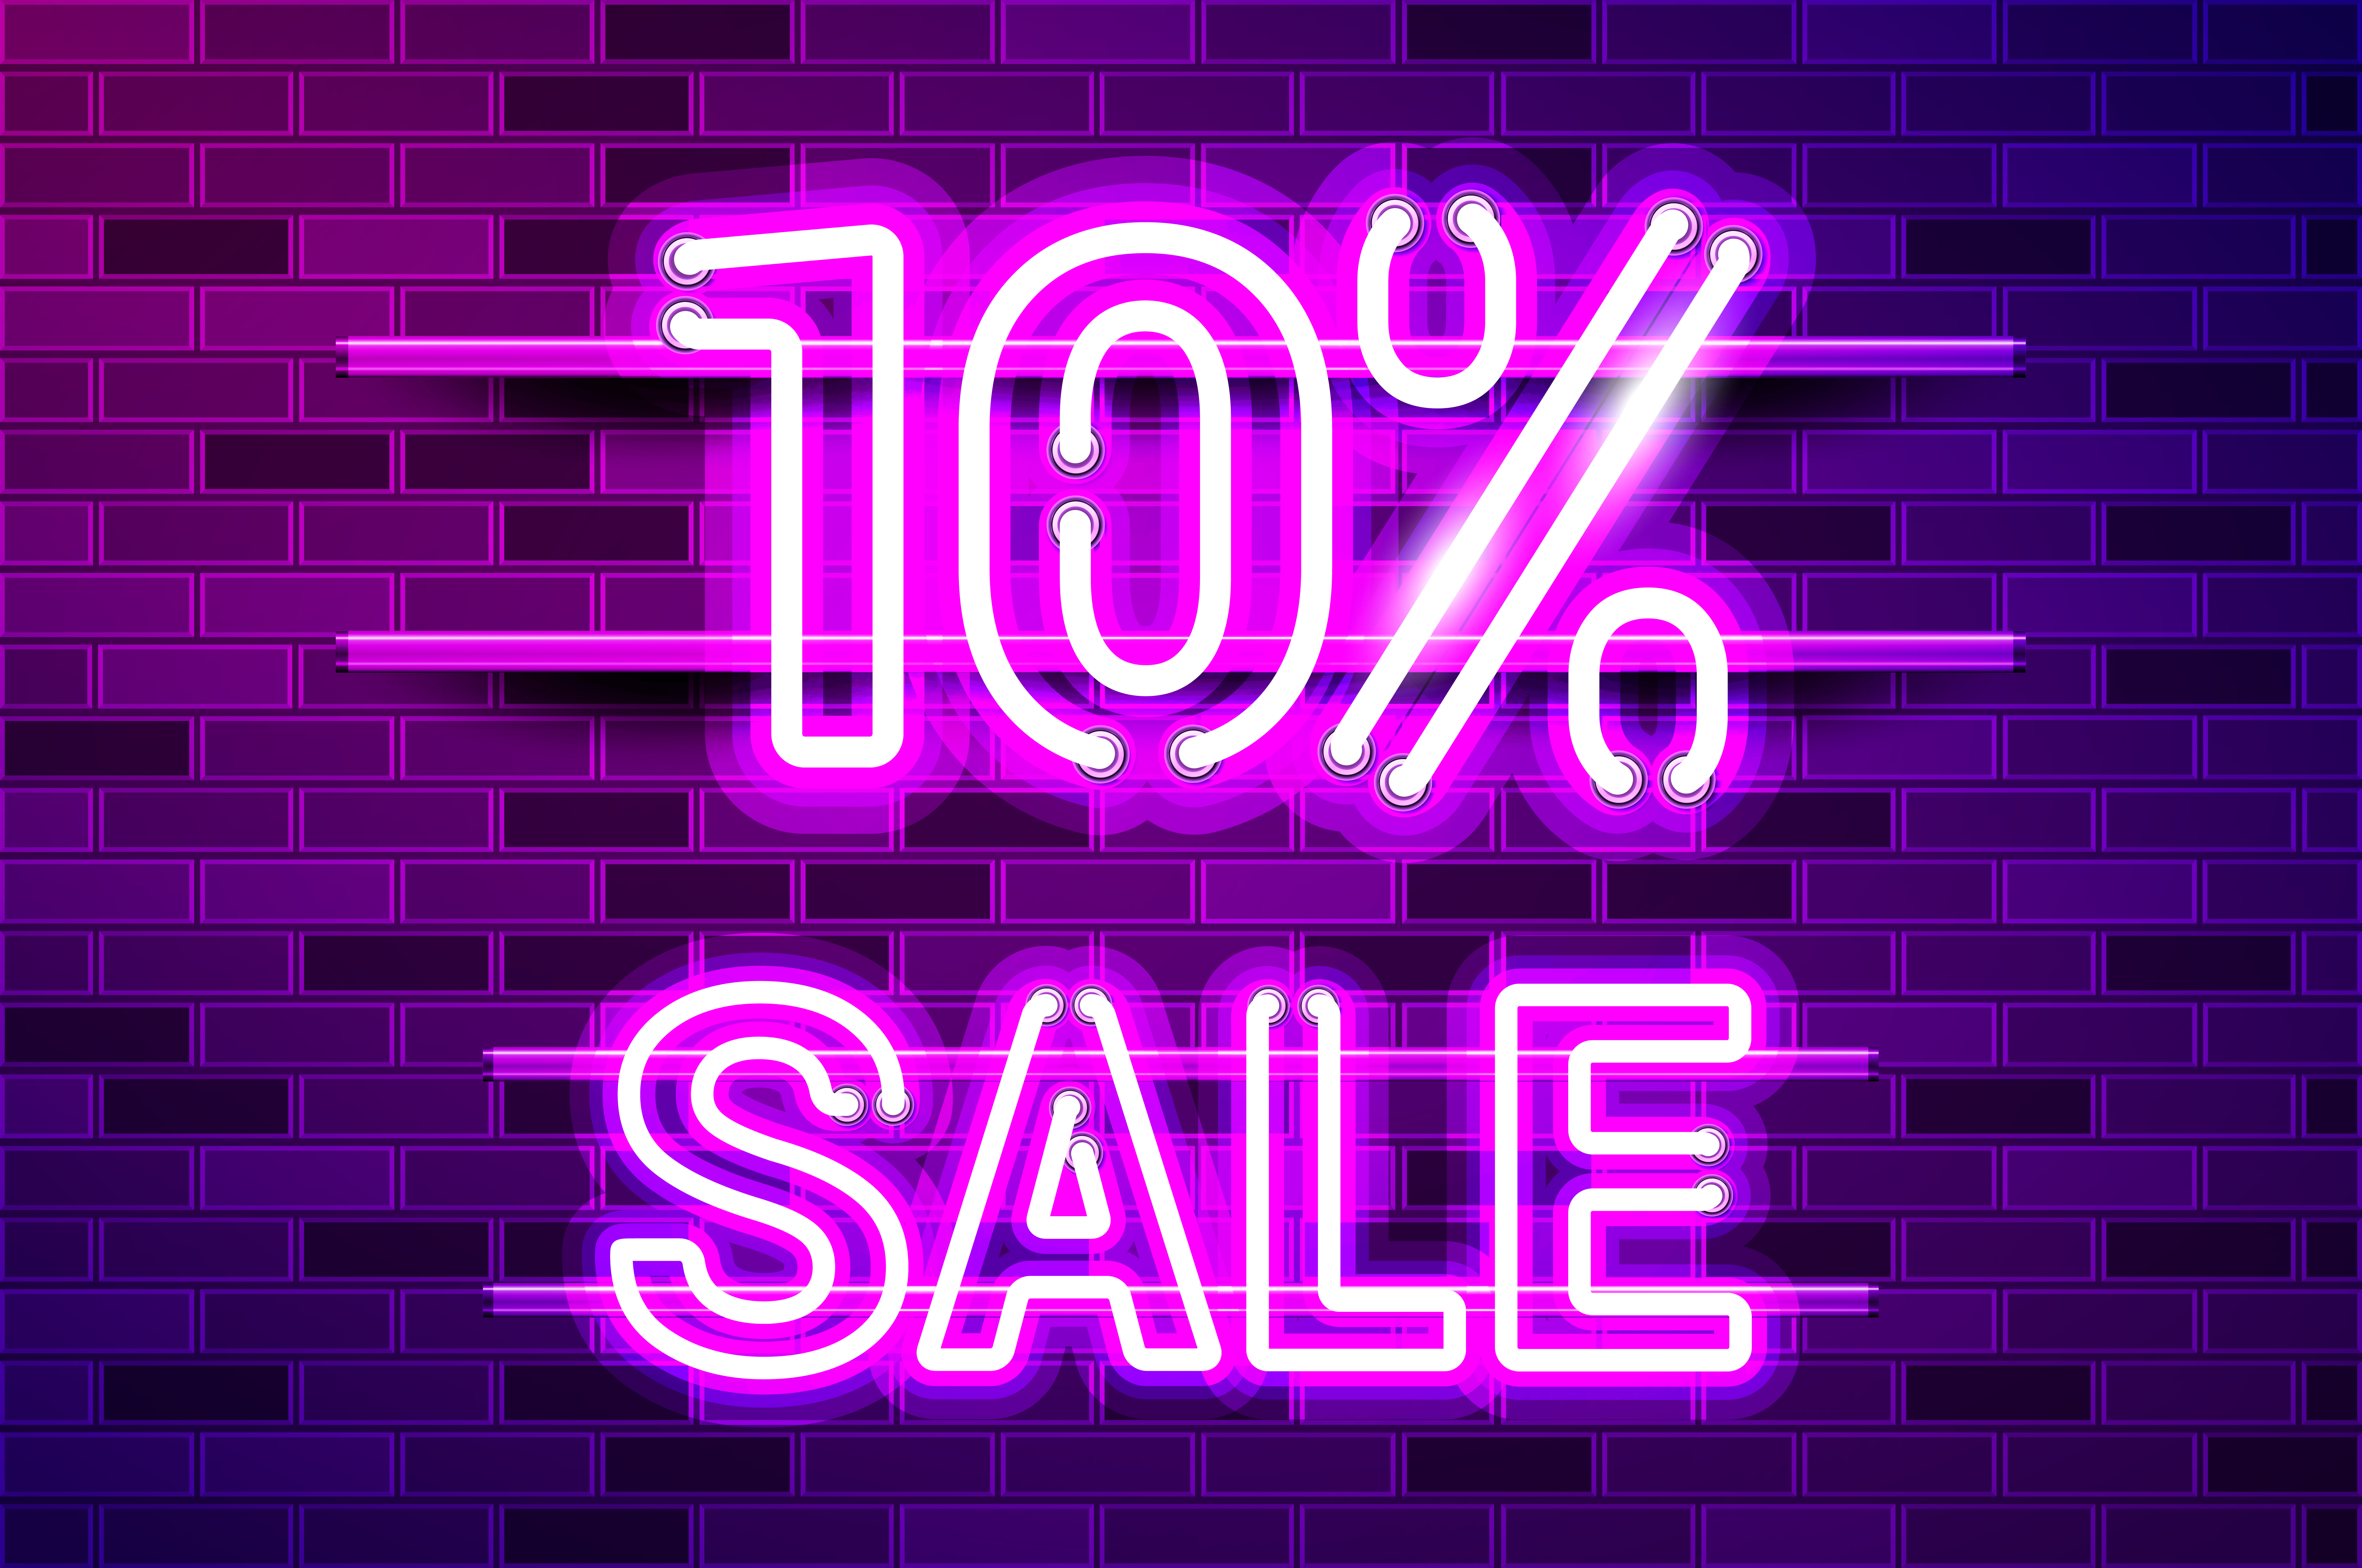 10 percent SALE glowing neon lamp sign. Realistic vector illustration. Purple brick wall, violet glow, metal holders.. 10 percent SALE glowing purple neon lamp sign